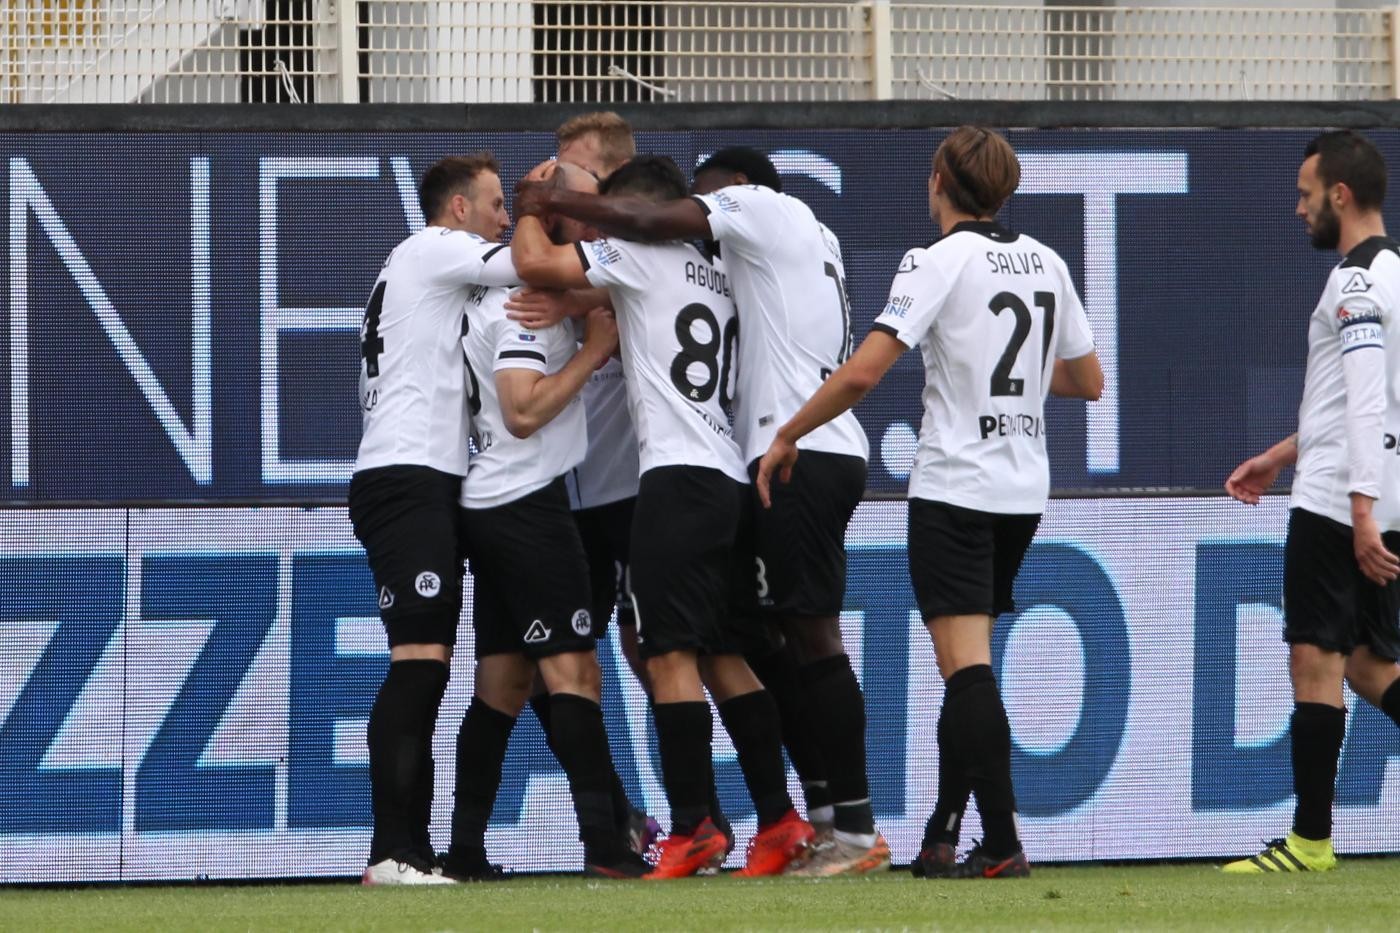 SPEZIA: FRIENDLY MATCH AGAINST TRENTO HAS BEEN CANCELED